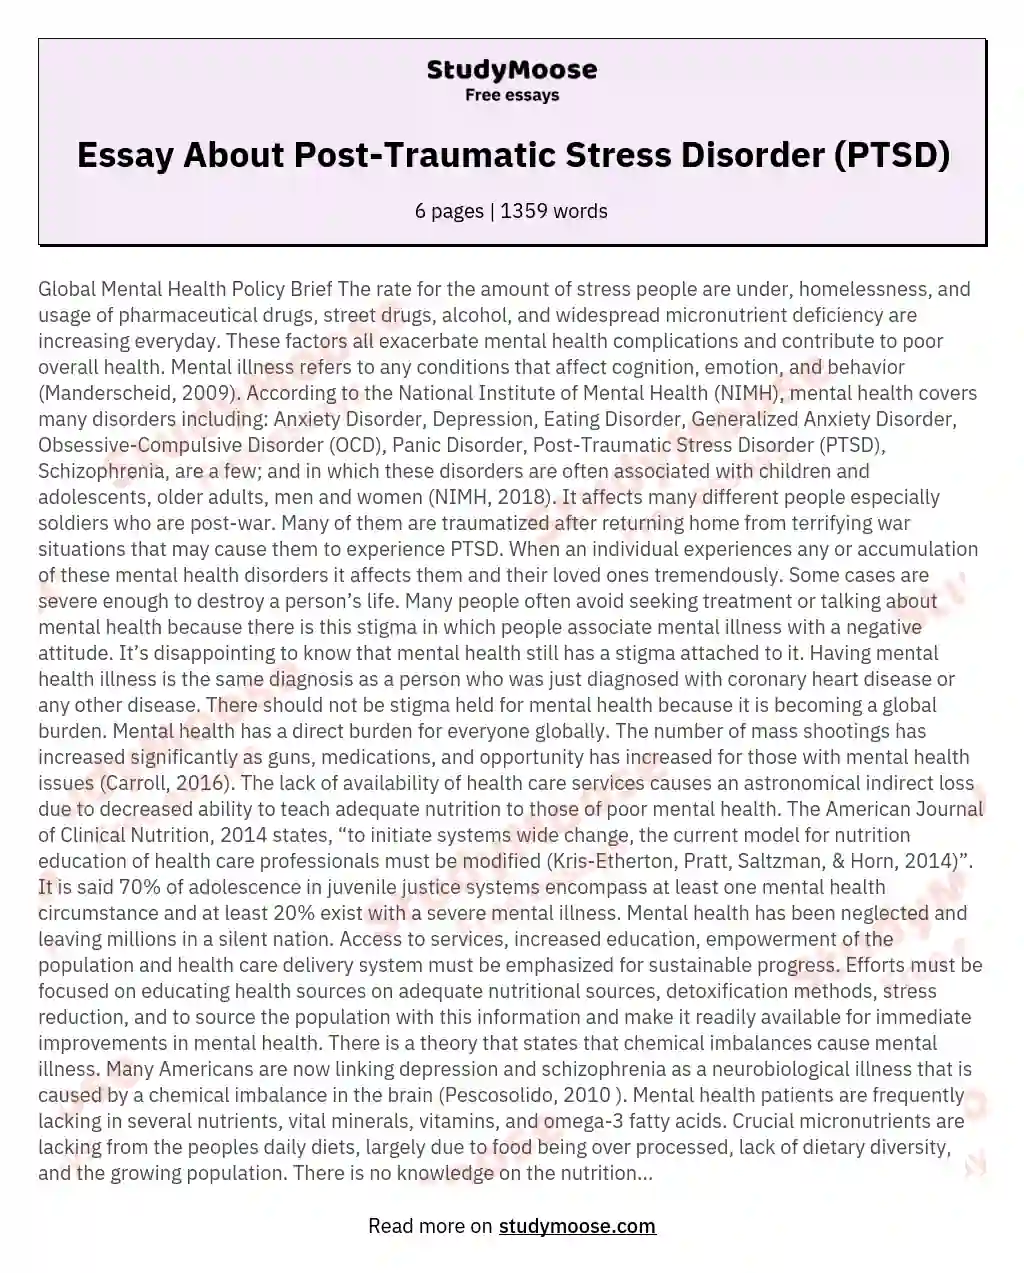 Essay About Post-Traumatic Stress Disorder (PTSD) essay